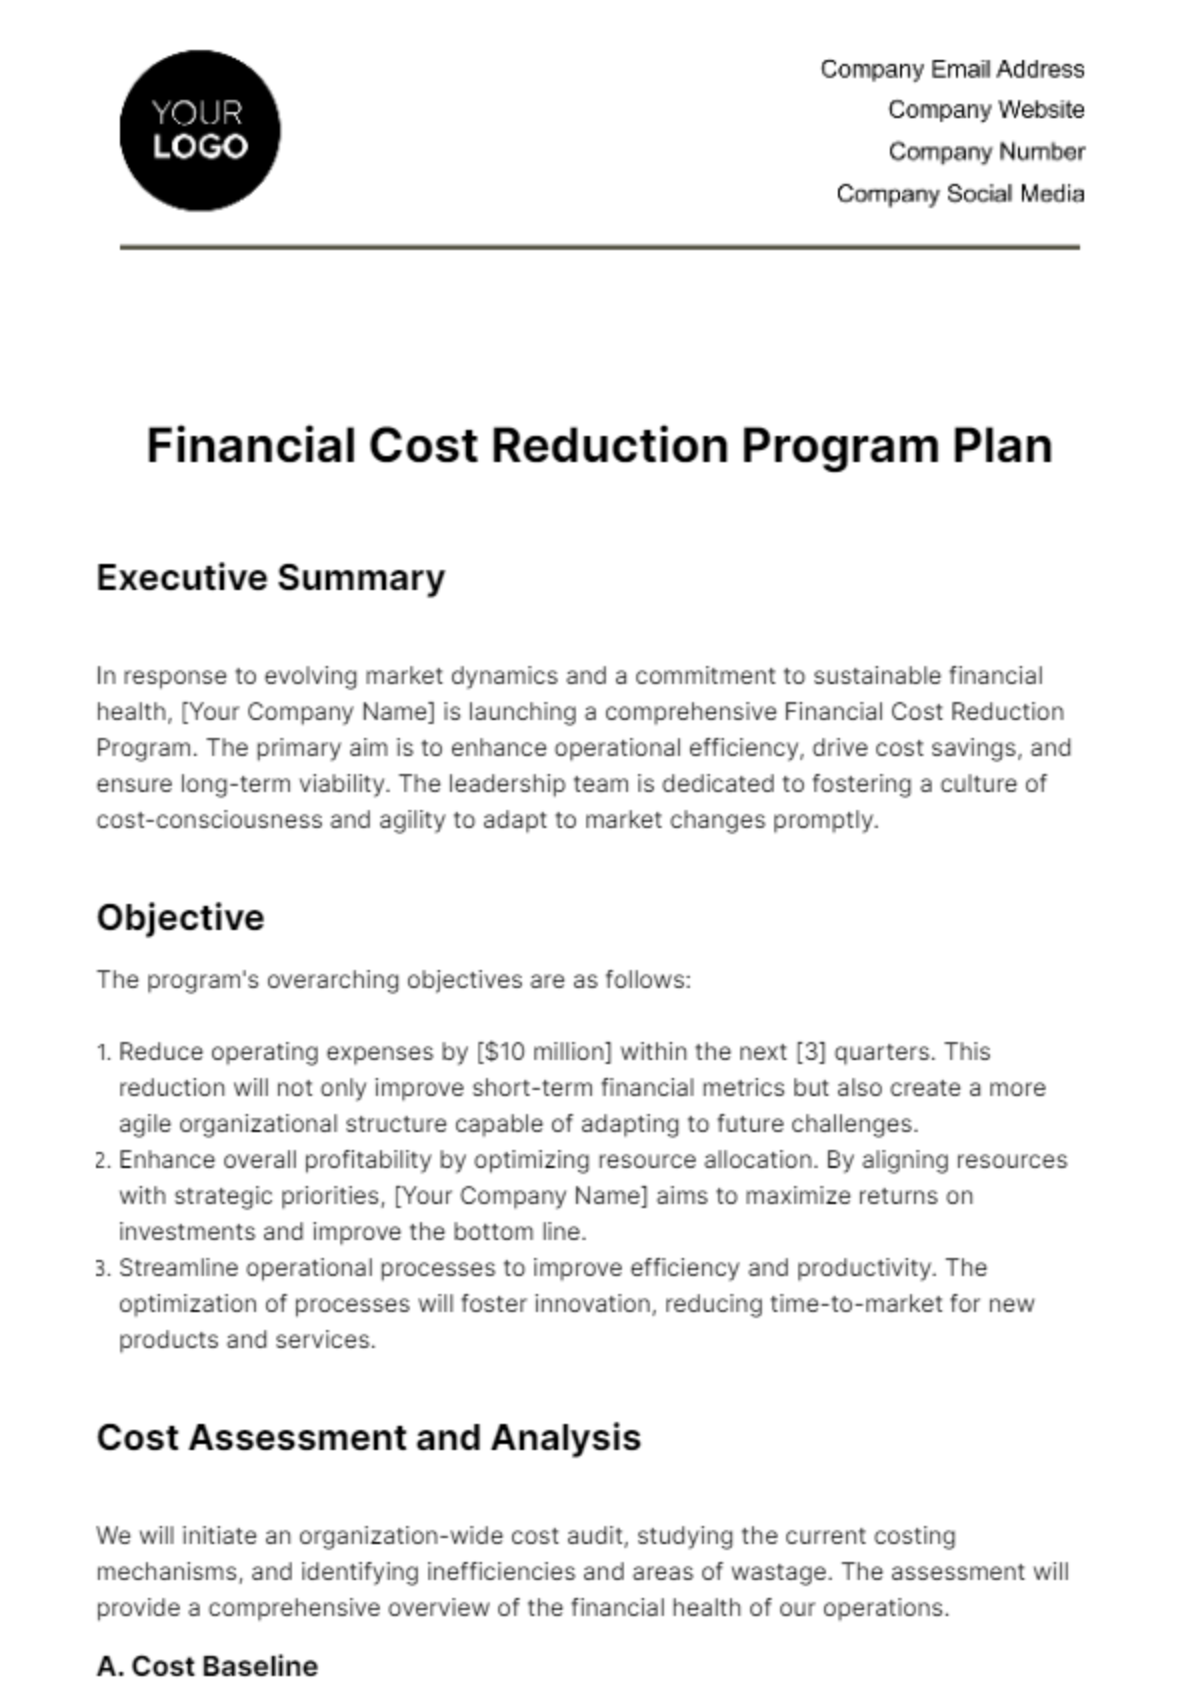 Financial Cost Reduction Program Plan Template